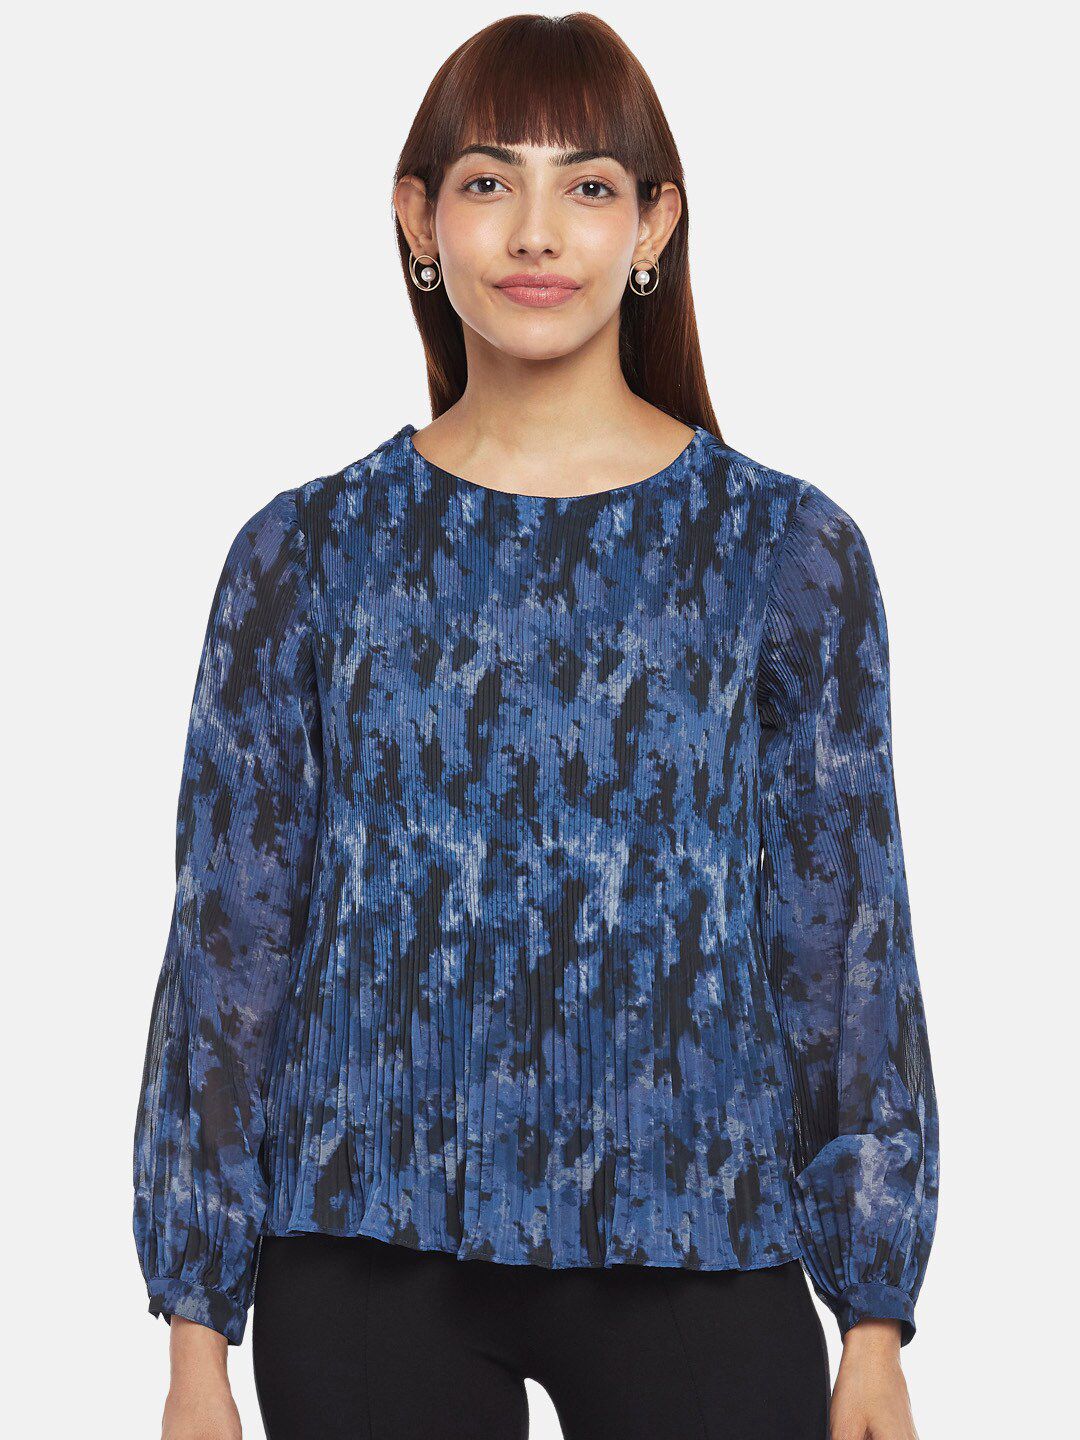 Annabelle by Pantaloons Women Blue And Black Abstract Print Long Sleeves Pleated Top Price in India